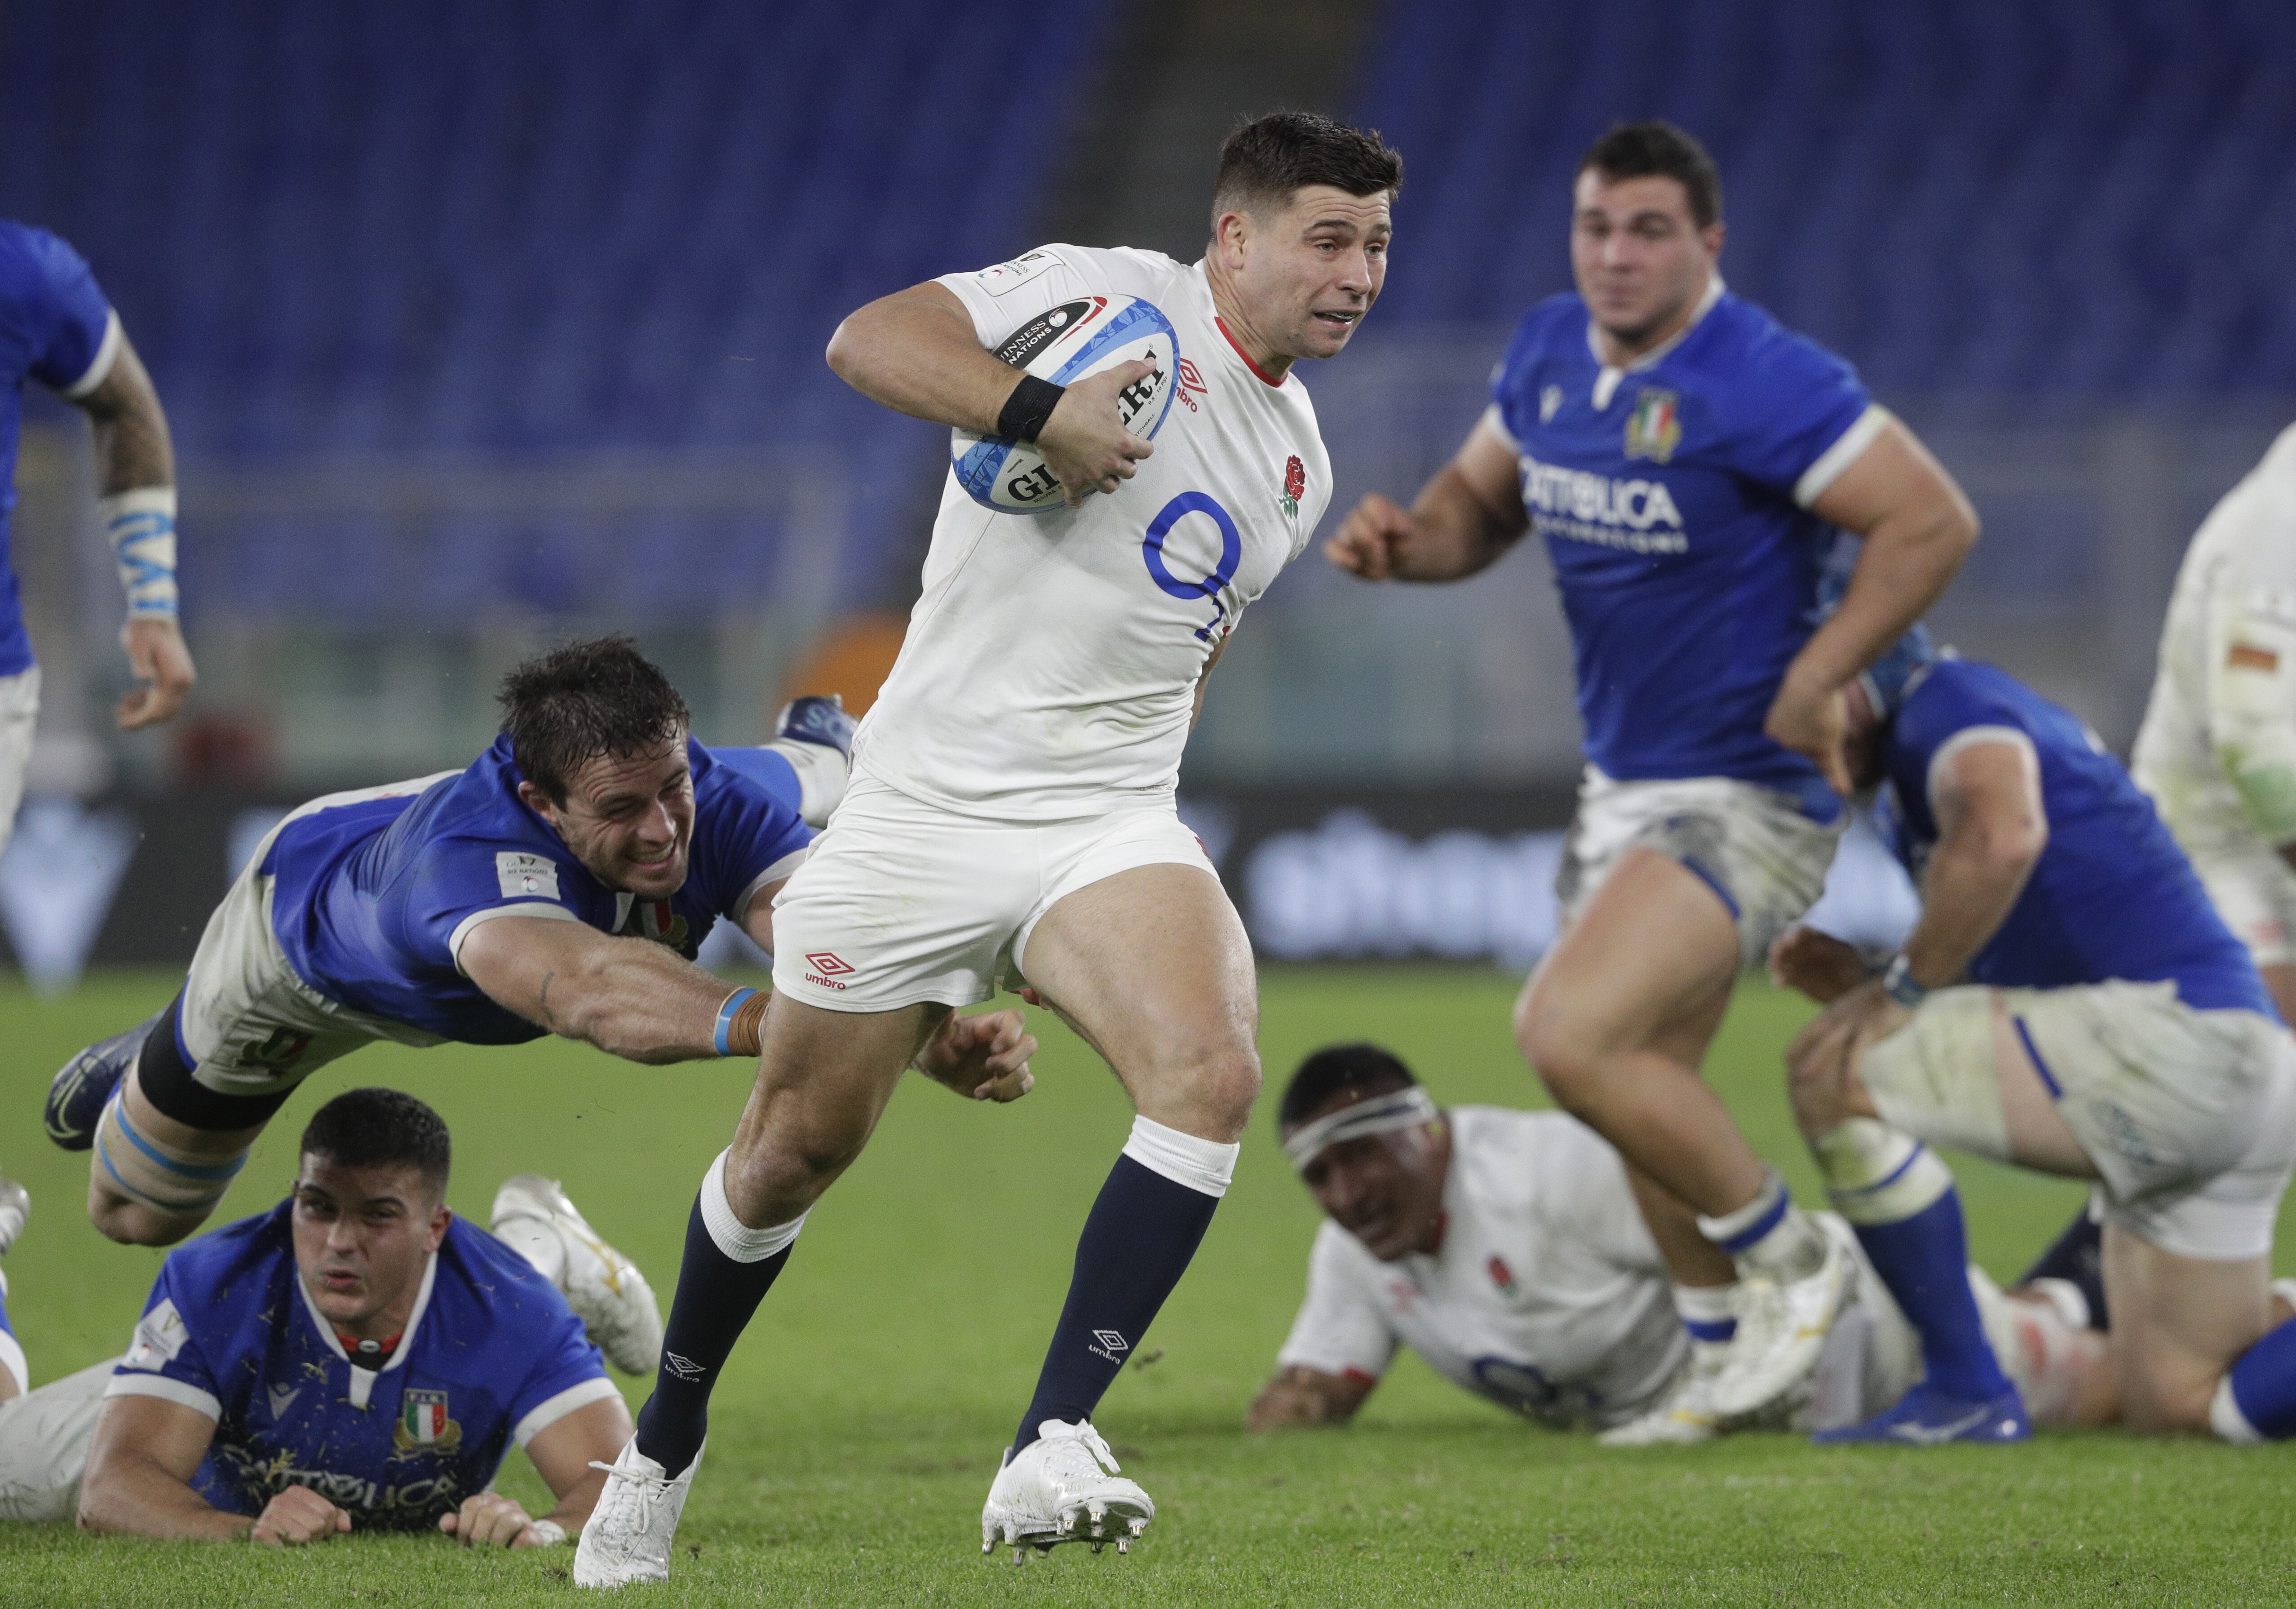 England’s Ben Youngs breaks free of the Italian defence as England claim the delayed Six Nations title. Photo: AP